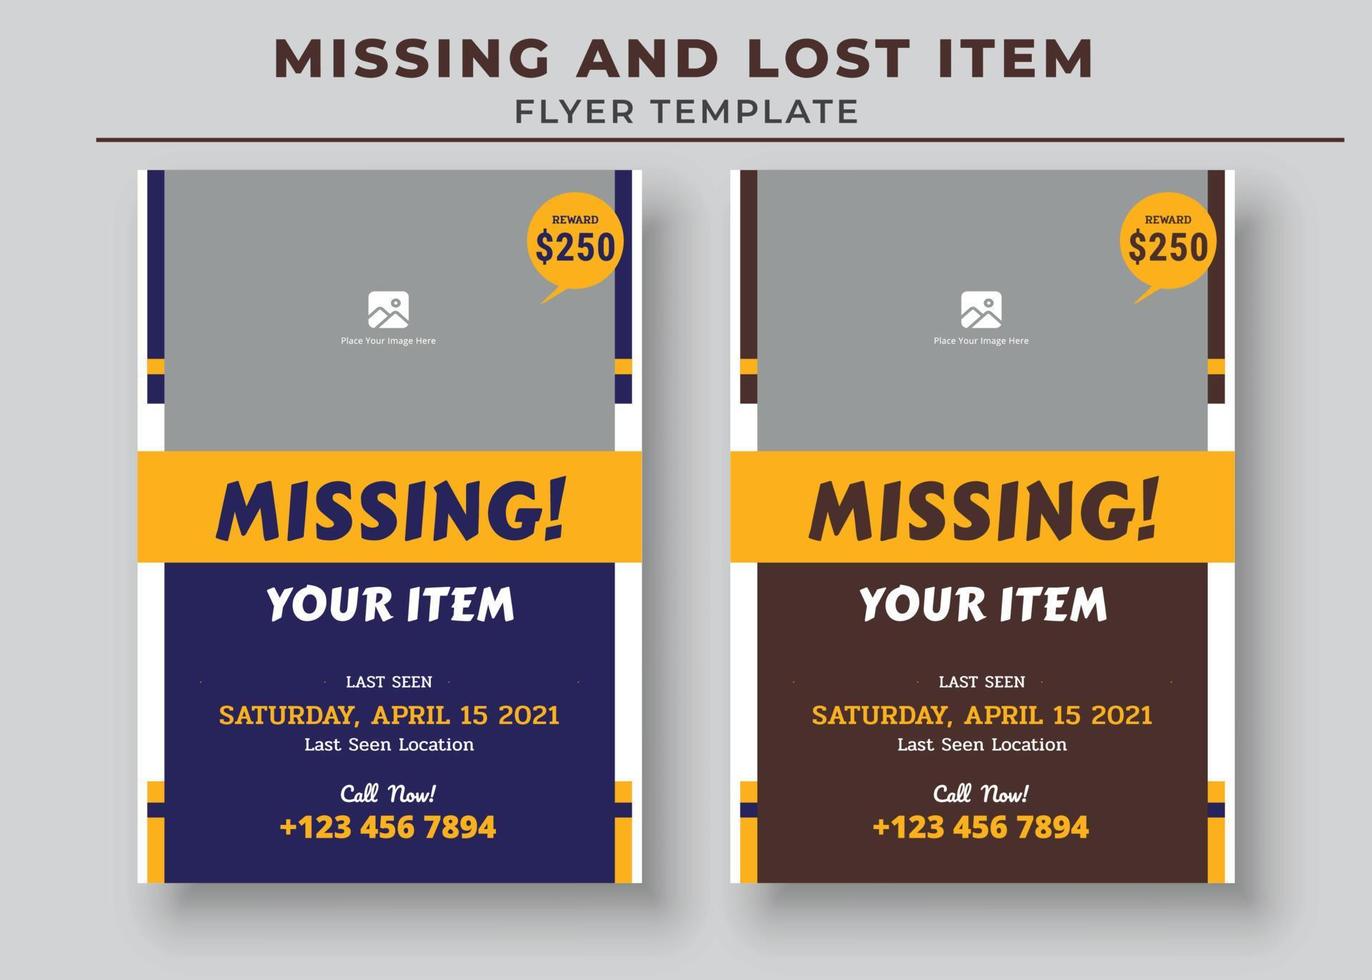 Missing and Lost Item flyer Template, Missing poster, Lost pet flyer template vector